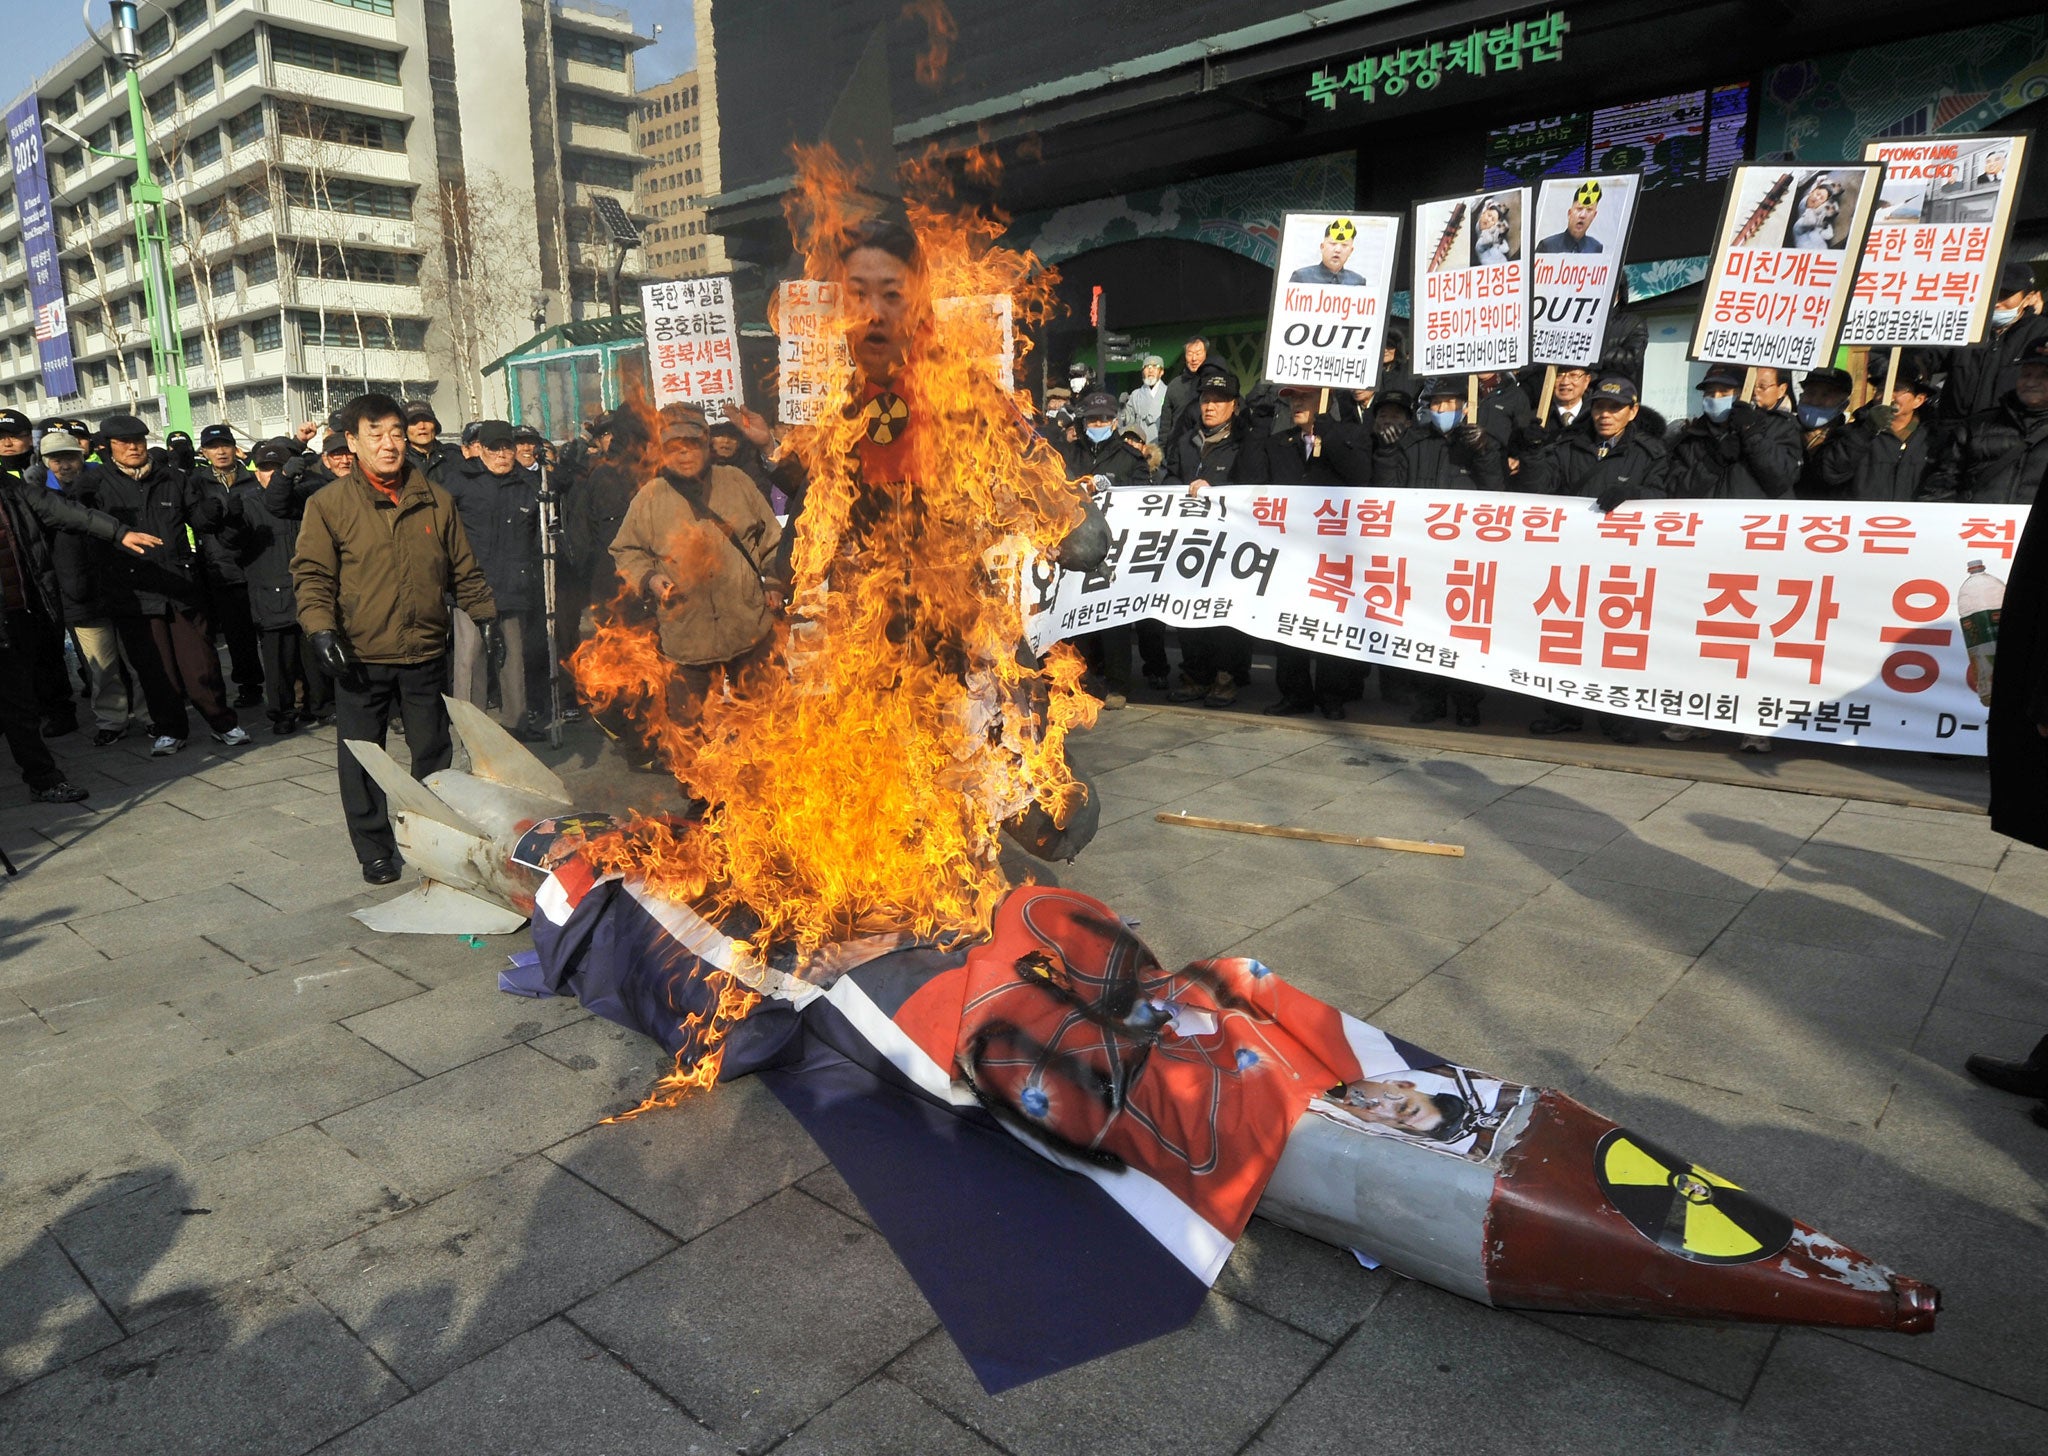 North Korea warned it could take "second and third steps" after a nuclear test last week. The test prompted protests in South Korea.